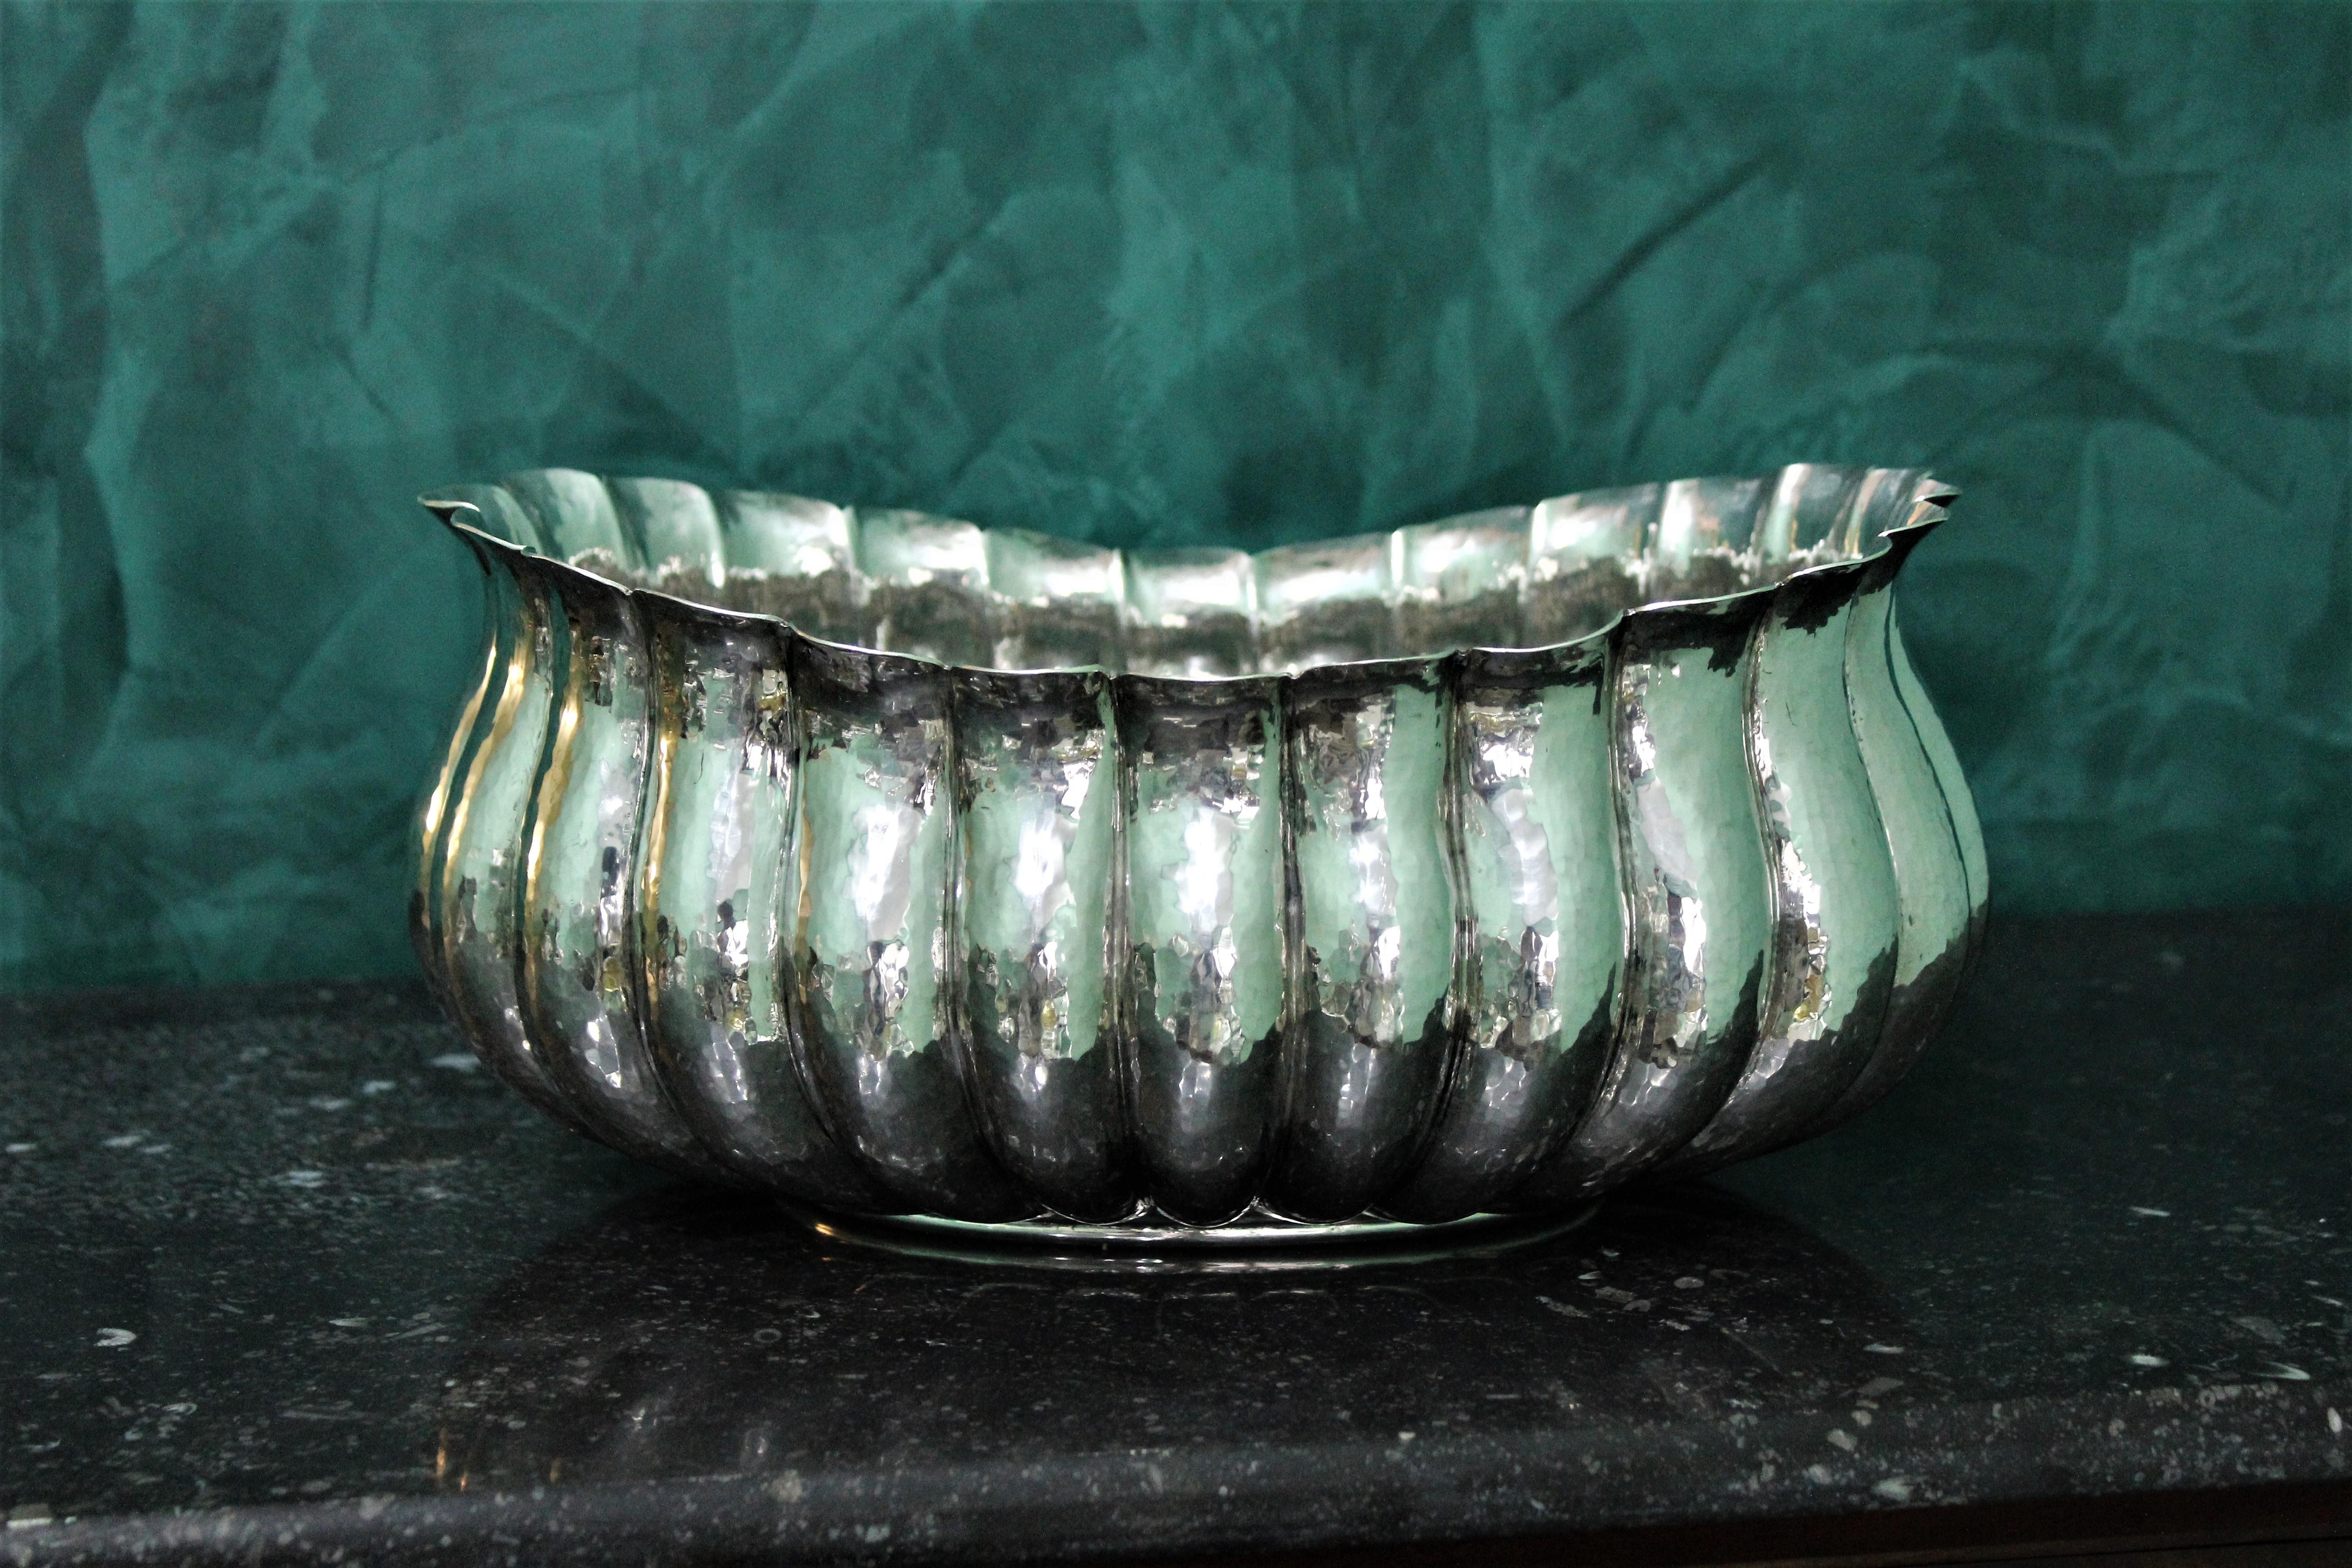 Beautiful centerpiece bowl by Gianmaria Buccellati.
Realized circa 1960s by the famous silversmith in Milan, Italy.
Realized by hand, embossed and hammered. Sterling Silver. 

In the pictures where there are 2 bowls, this one is the bigger